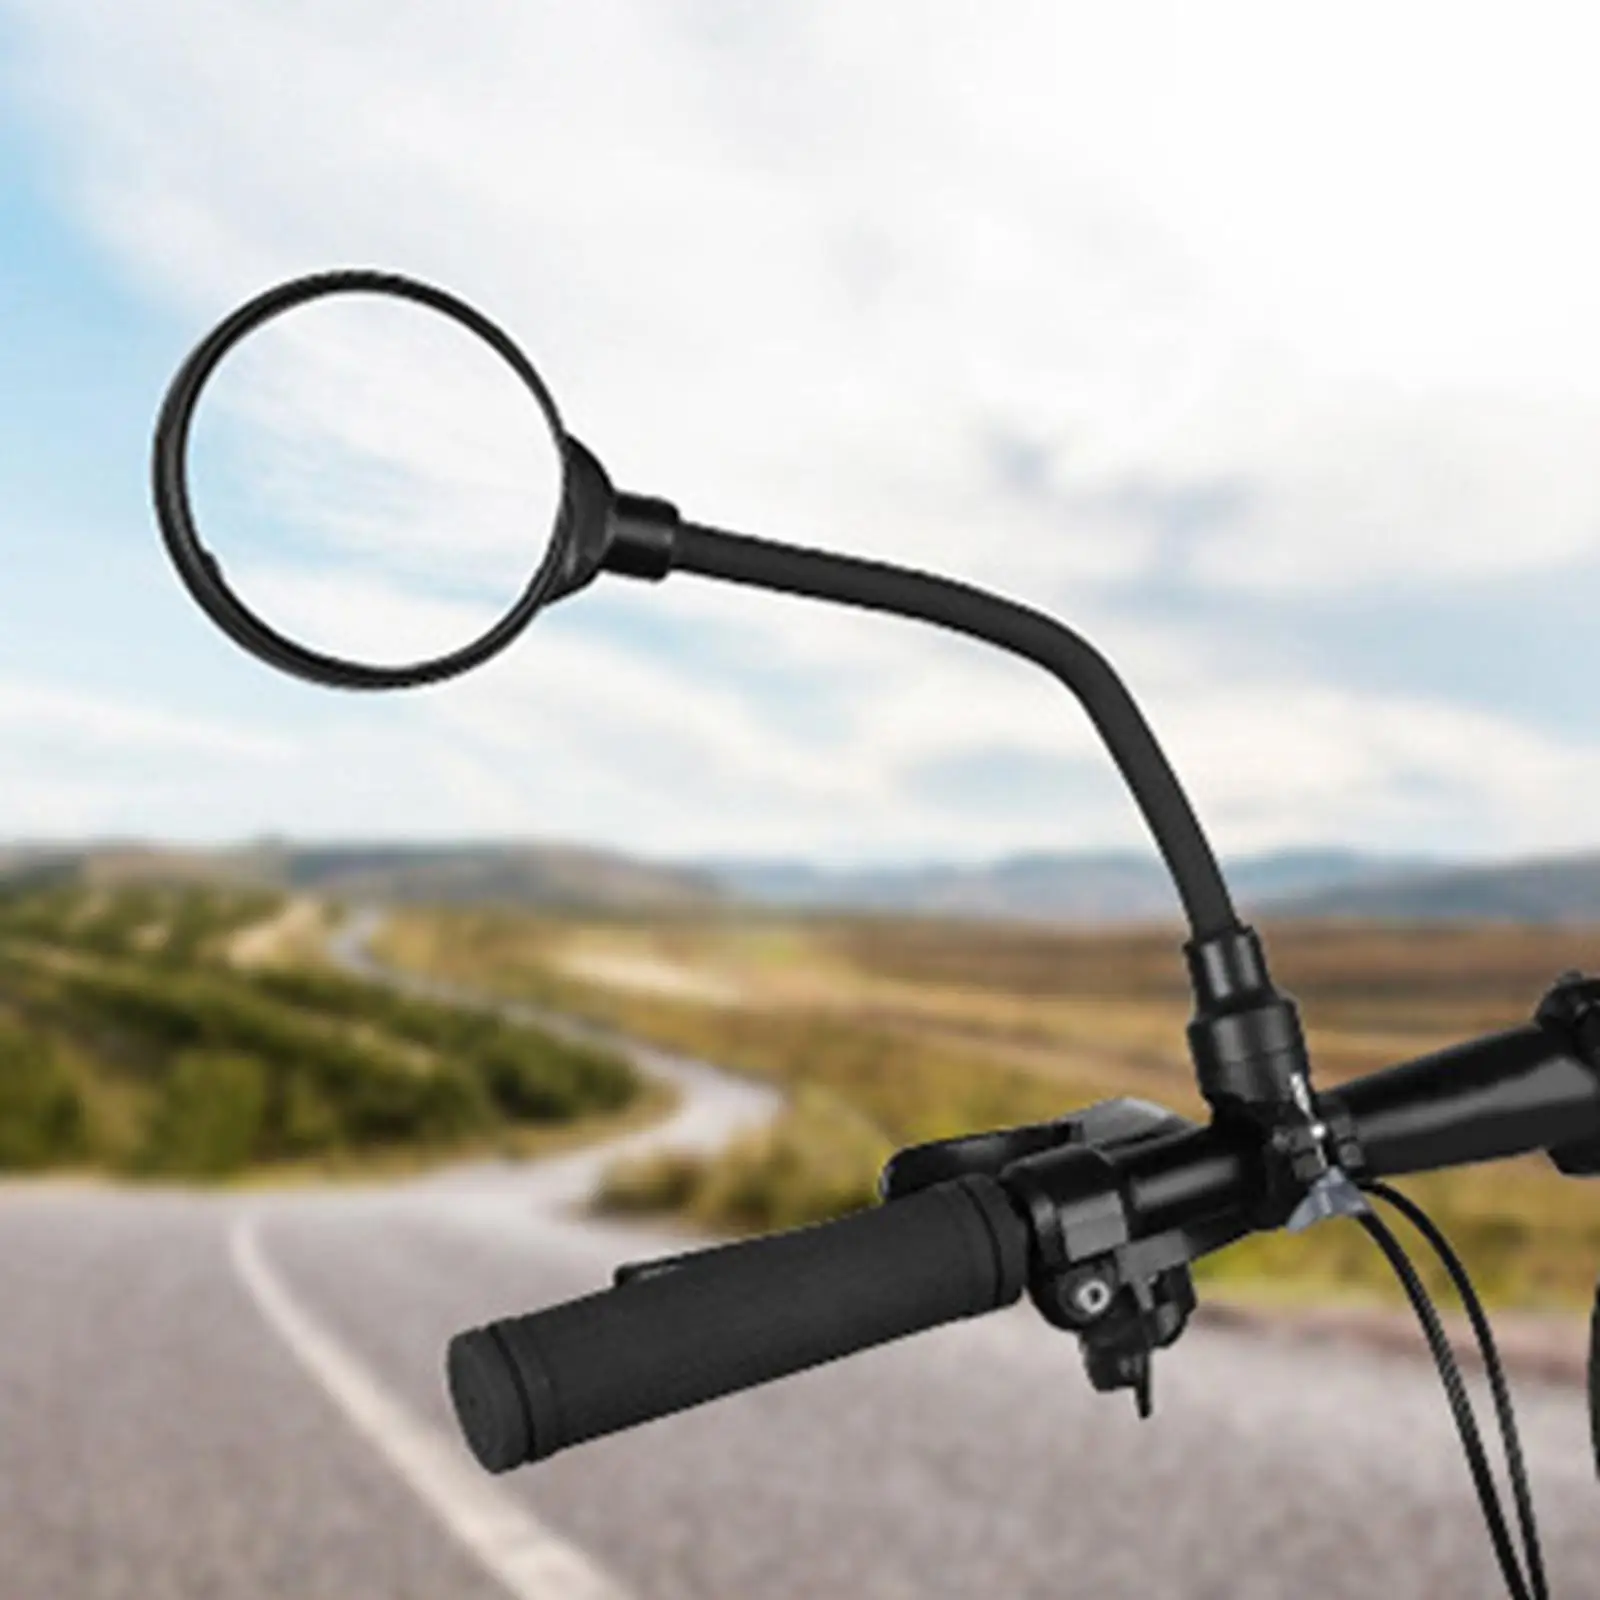 Bike Mirror Handlebar Rear View Mirror Rotatable Bicycle Rear View Mirror Wide Angle Acrylic Convex Mirror for Mountain Bikes